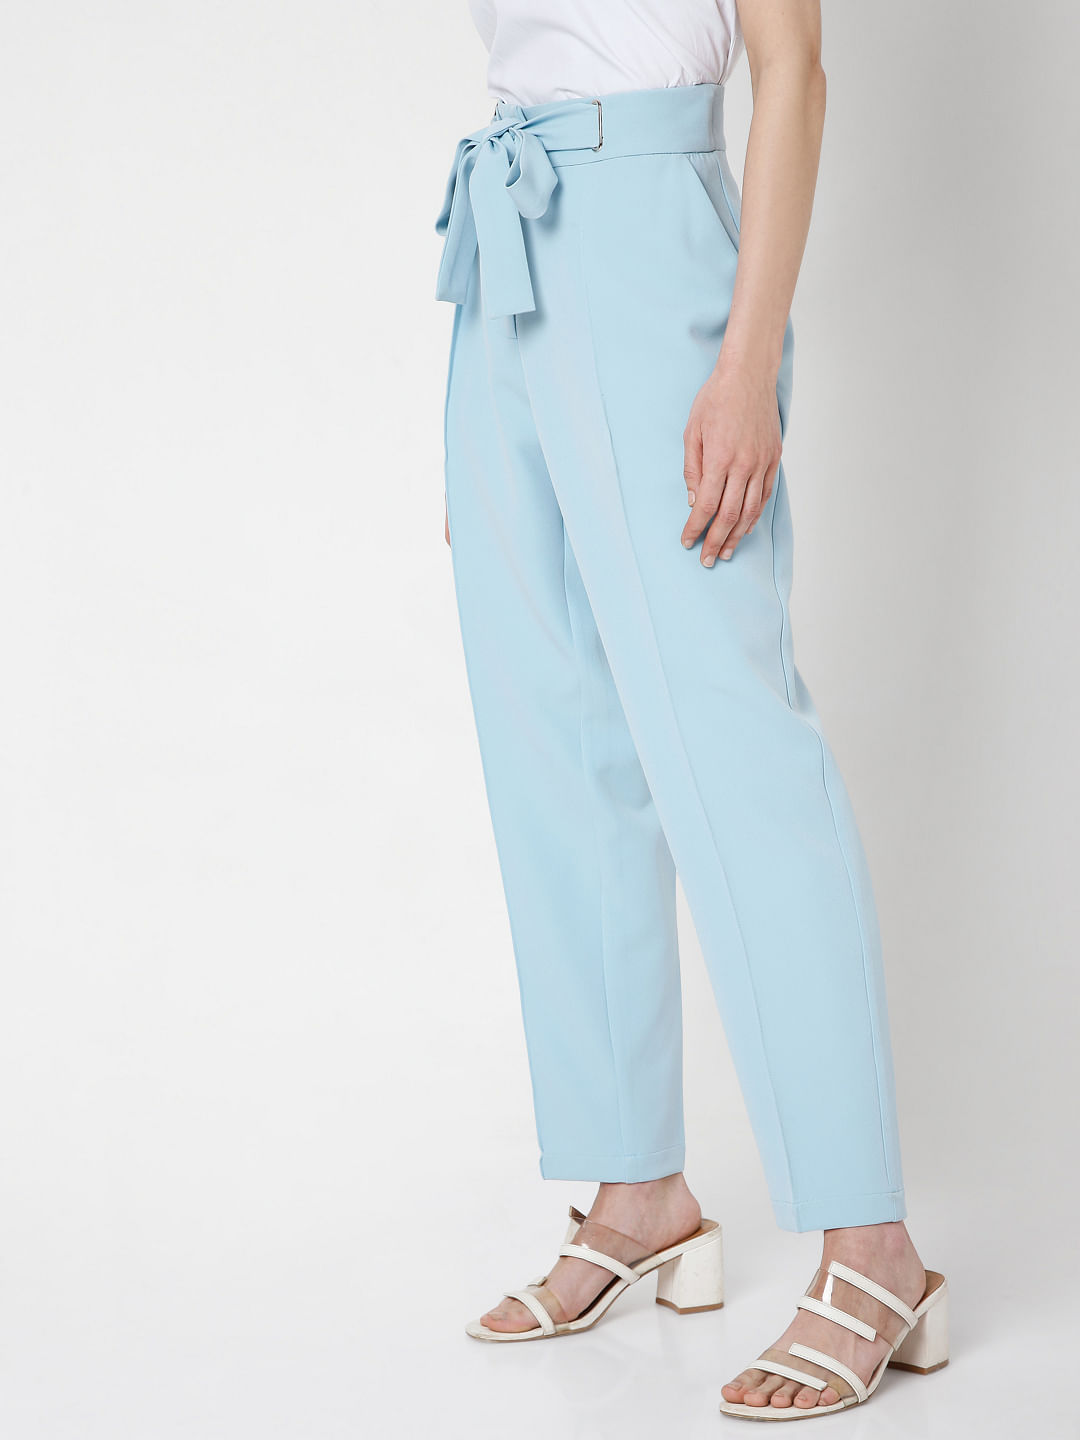 Buy New Look Formal Trousers & Hight Waist Pants online - 4 products |  FASHIOLA INDIA